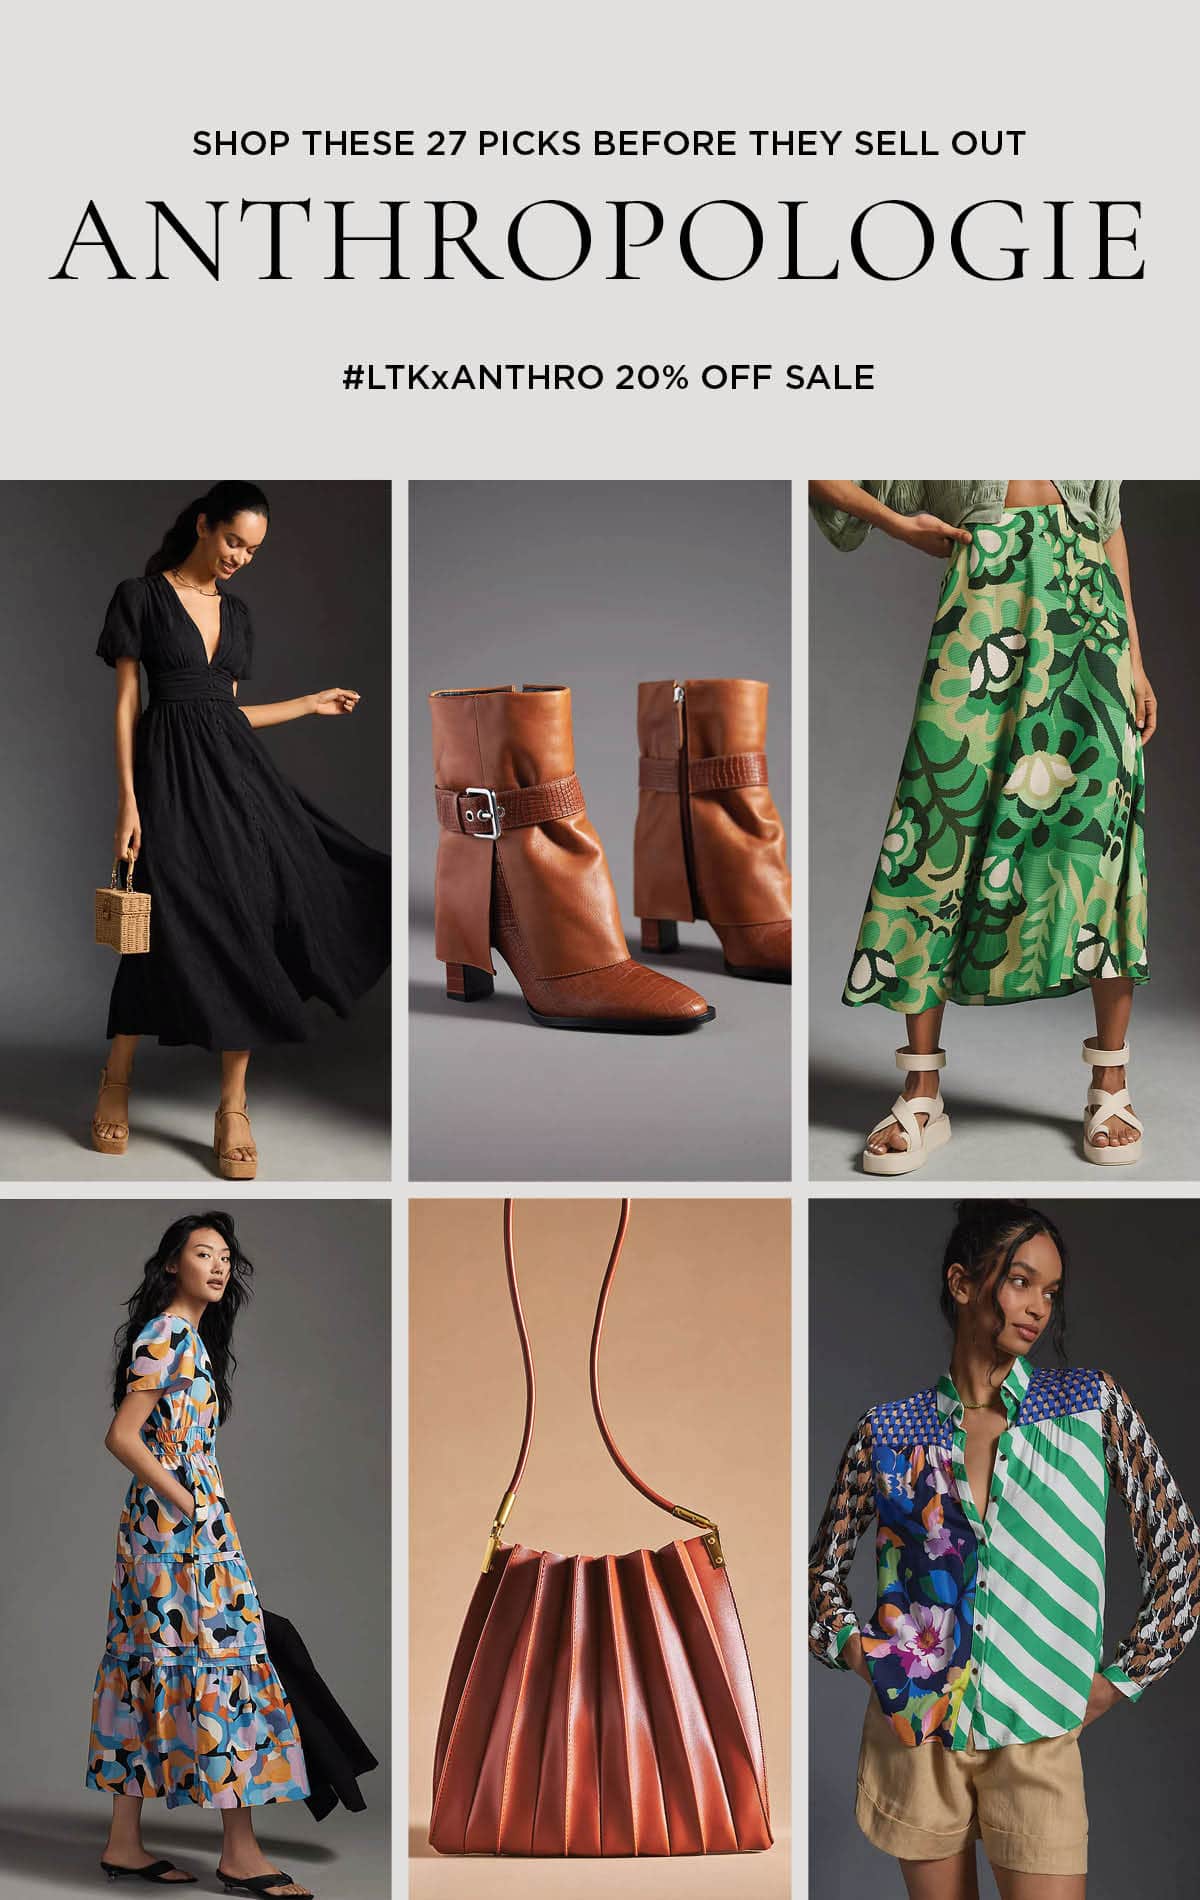 Sale Alert! Shop These 27 Anthro's Pieces Before They Sell Out - Shop these top picks during the the #LTKxAnthro 20% off sale.